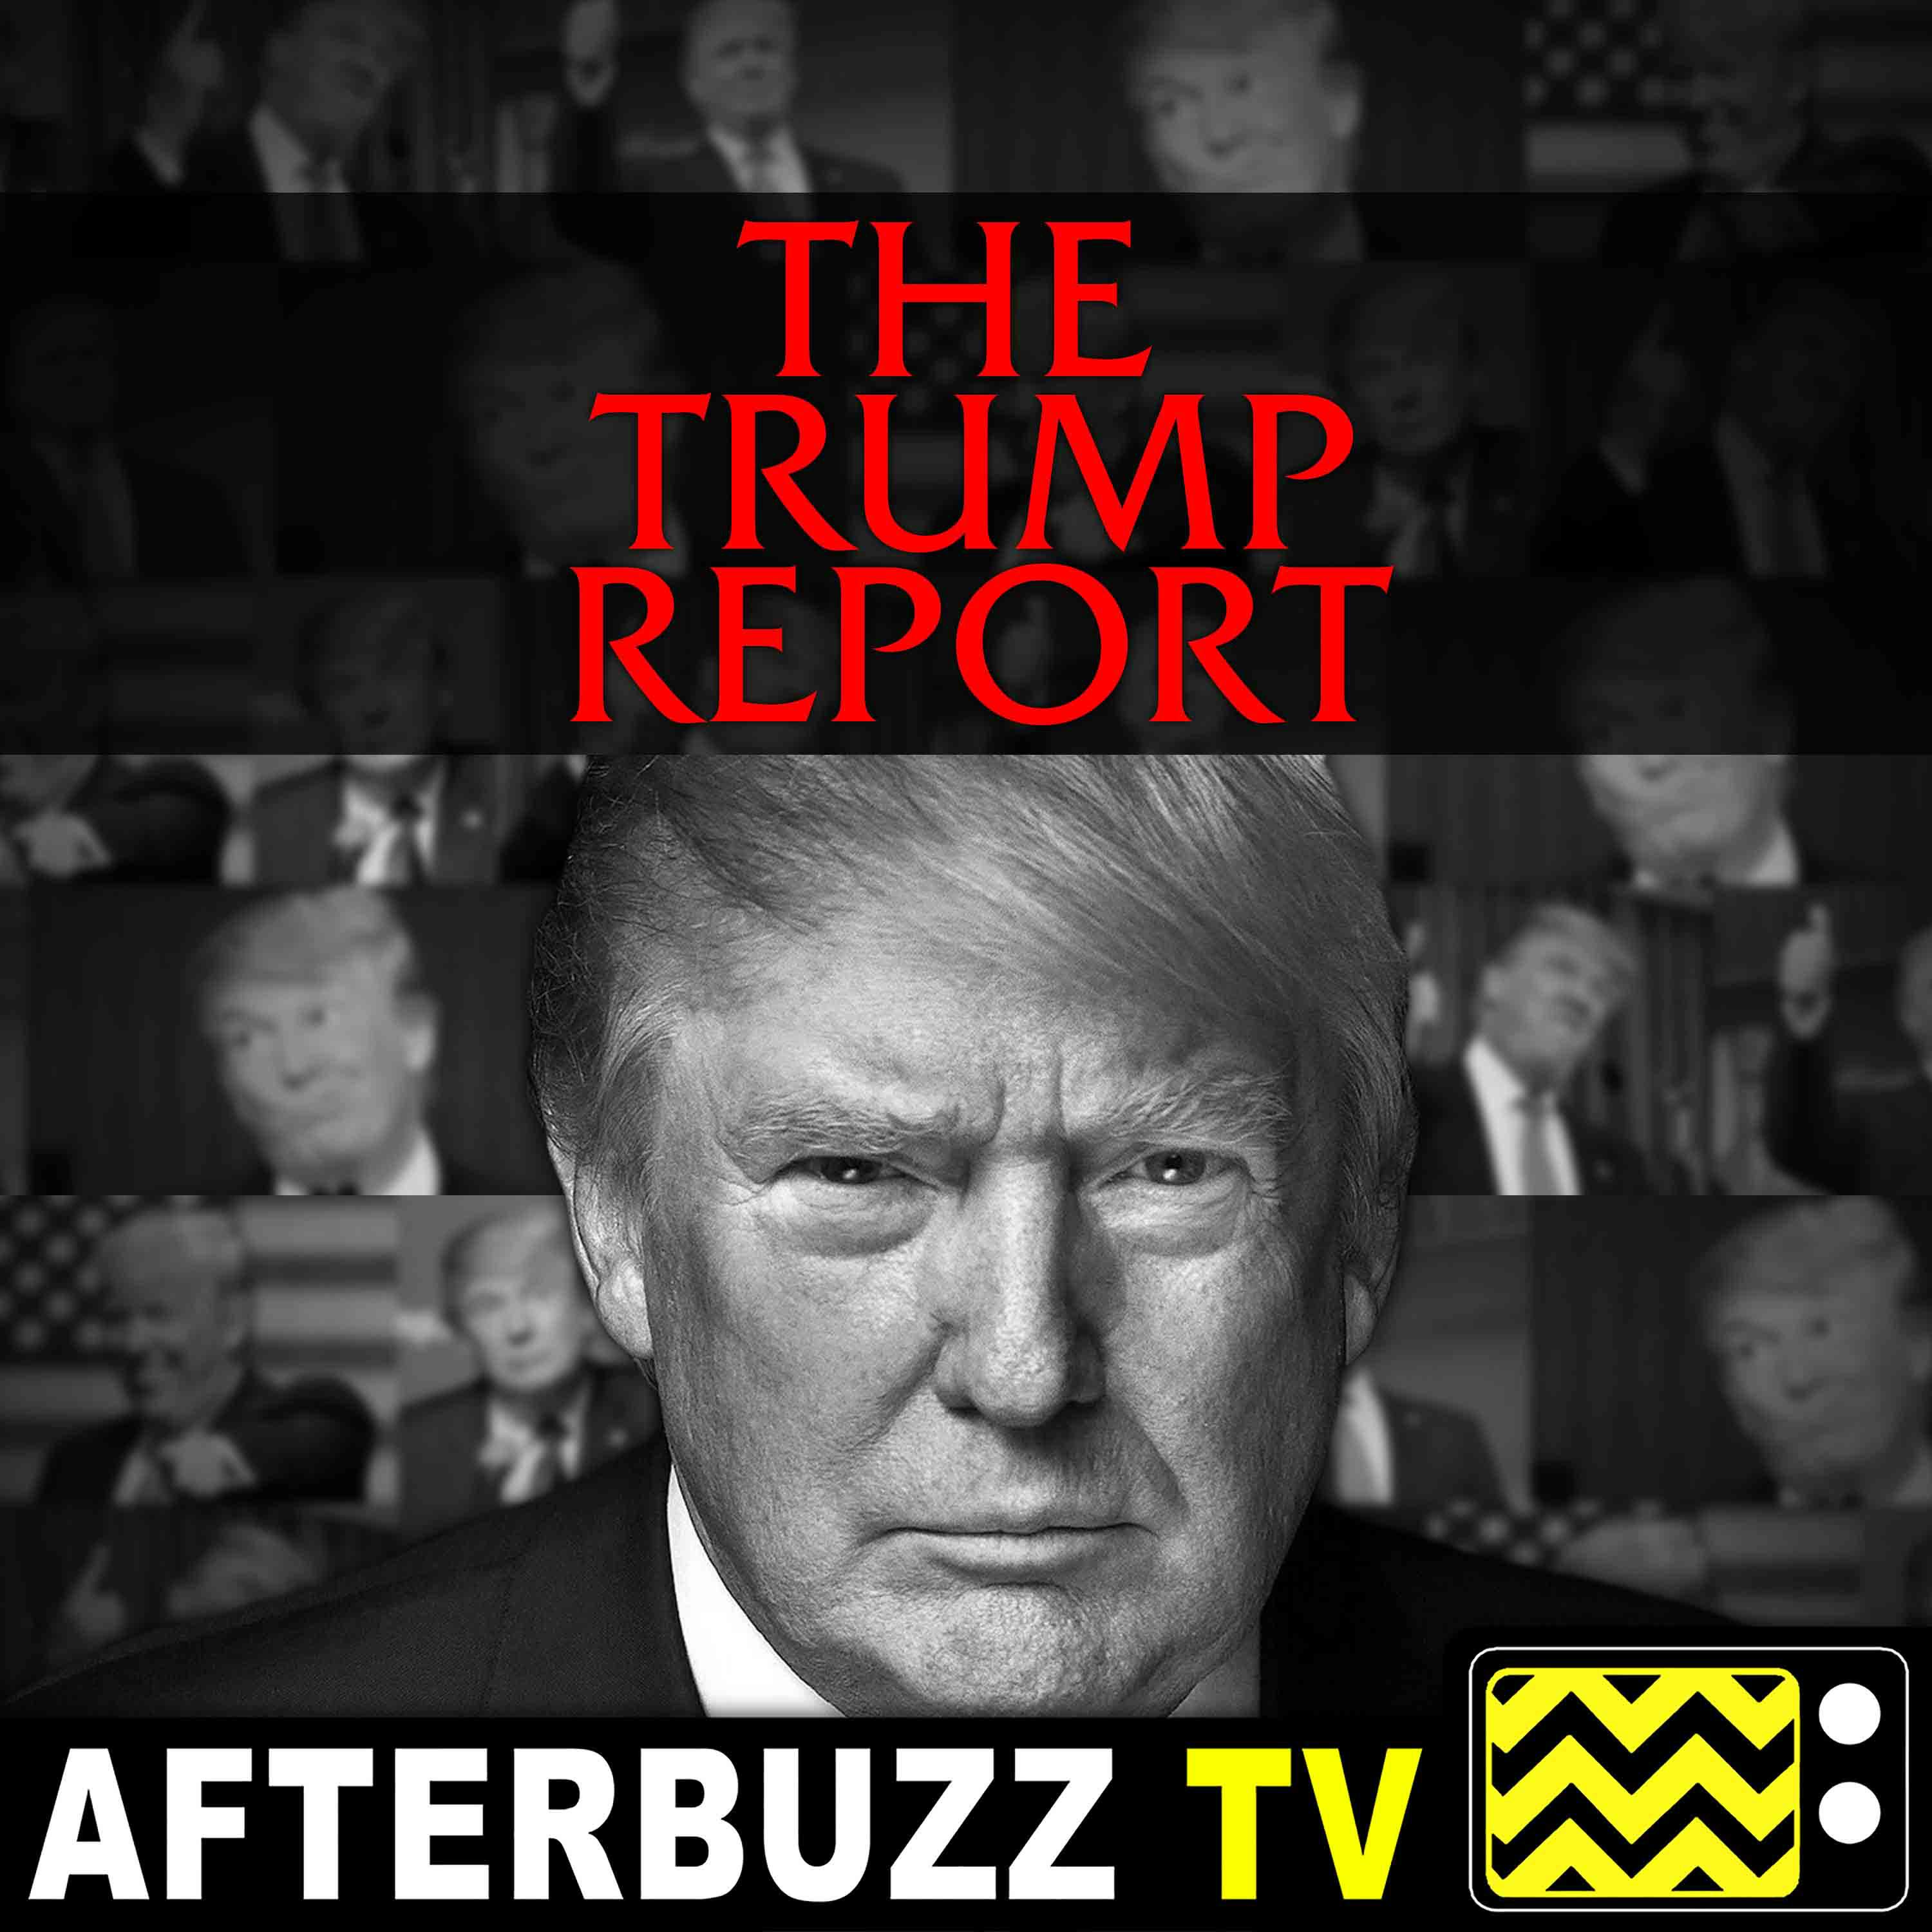 Prince Charles, the Easter Bunny and More | AfterBuzz TV’s The Trump Report